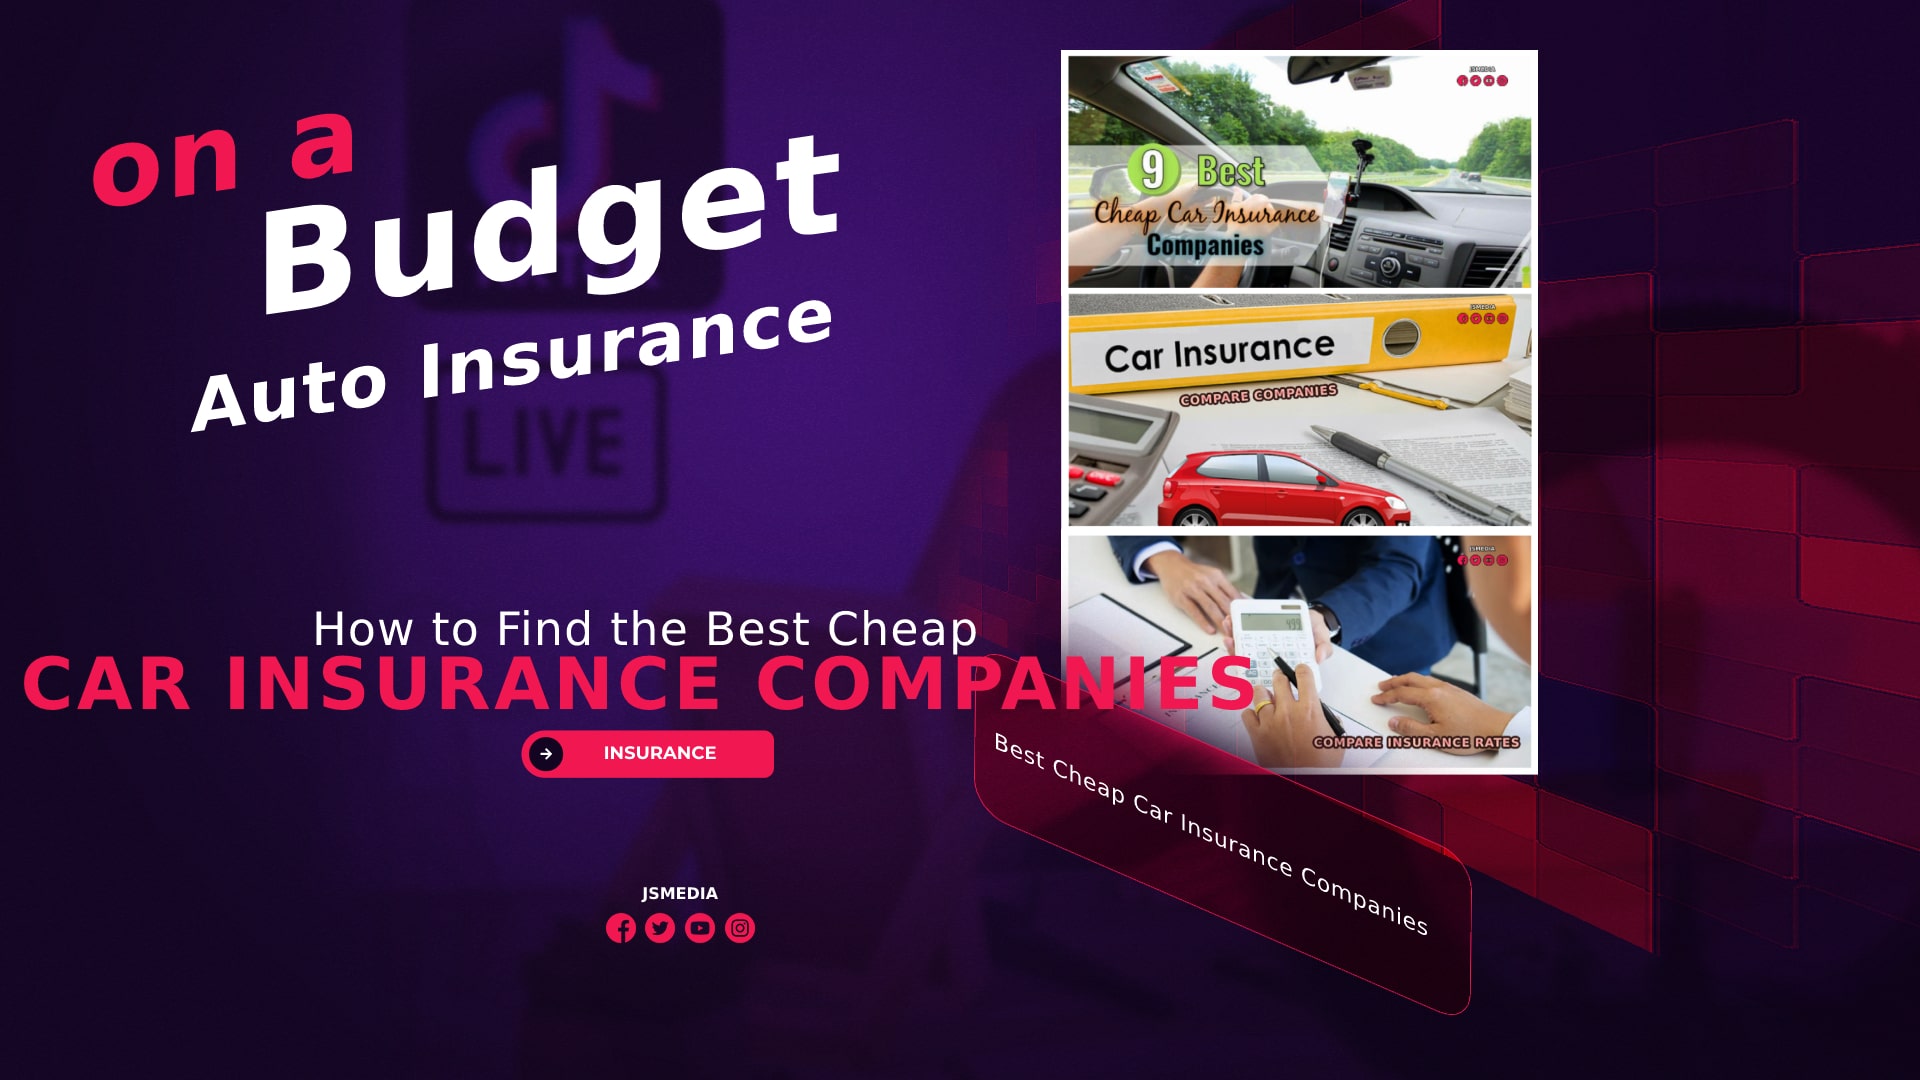 Auto Insurance - How to Find the Best Cheap Car Insurance Companies on a Budget